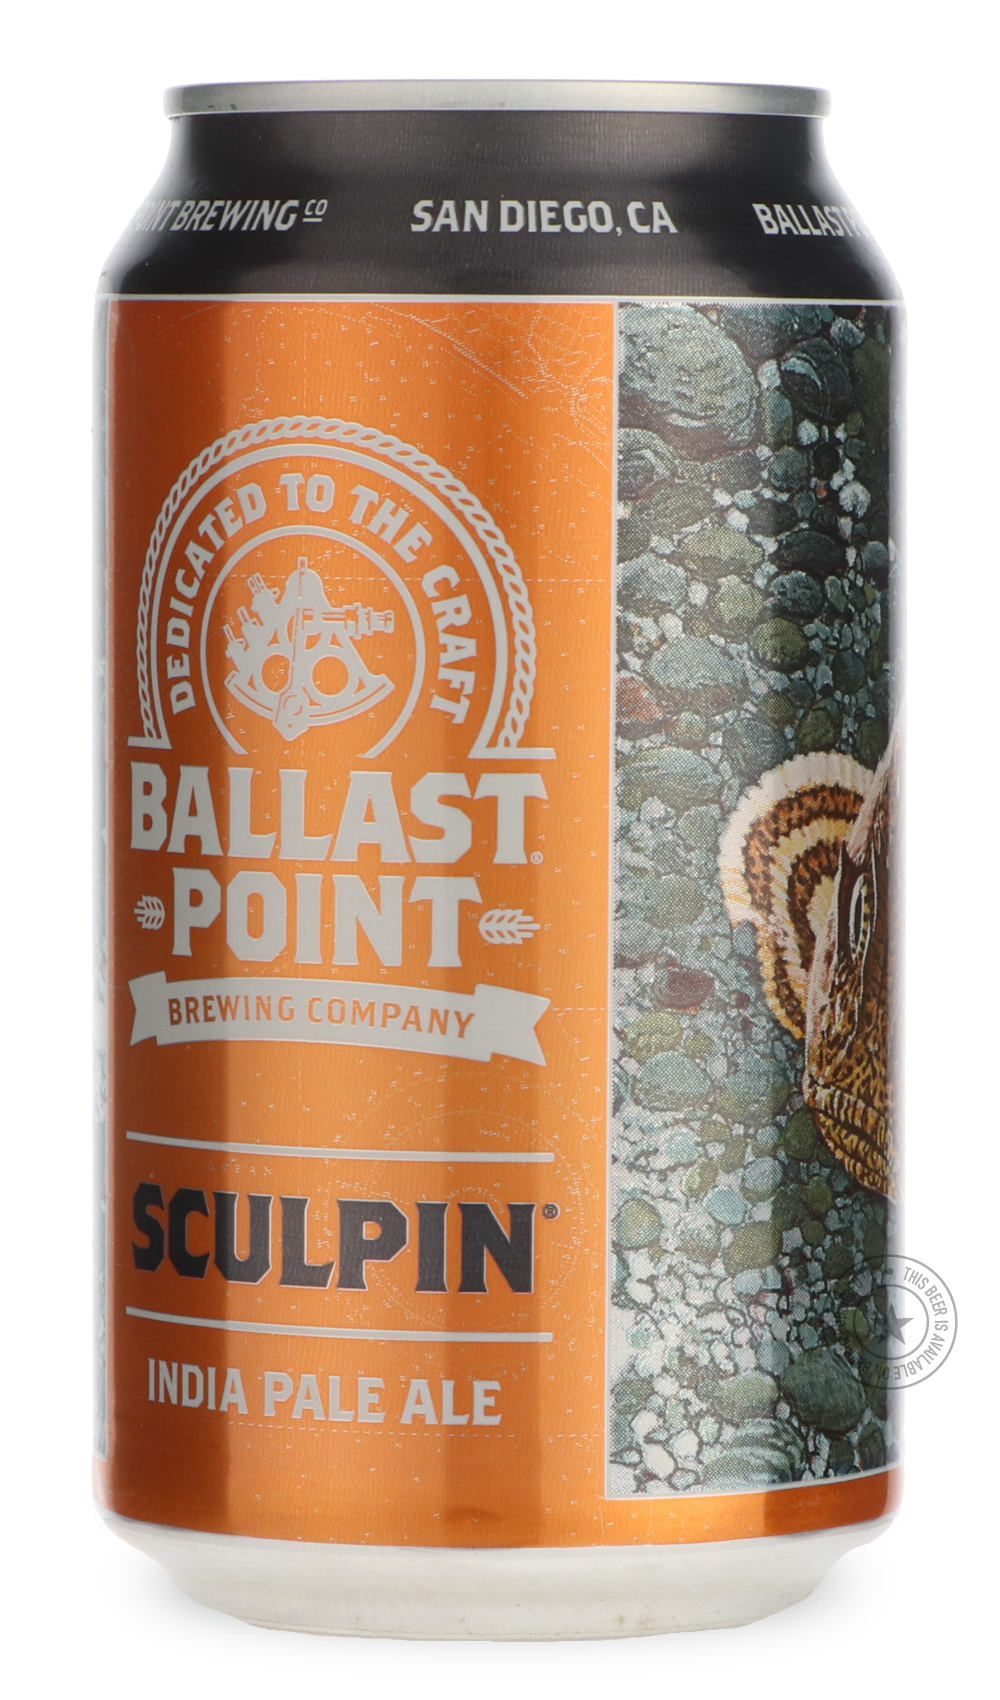 -Ballast Point- Sculpin-IPA- Only @ Beer Republic - The best online beer store for American & Canadian craft beer - Buy beer online from the USA and Canada - Bier online kopen - Amerikaans bier kopen - Craft beer store - Craft beer kopen - Amerikanisch bier kaufen - Bier online kaufen - Acheter biere online - IPA - Stout - Porter - New England IPA - Hazy IPA - Imperial Stout - Barrel Aged - Barrel Aged Imperial Stout - Brown - Dark beer - Blond - Blonde - Pilsner - Lager - Wheat - Weizen - Amber - Barley Wi